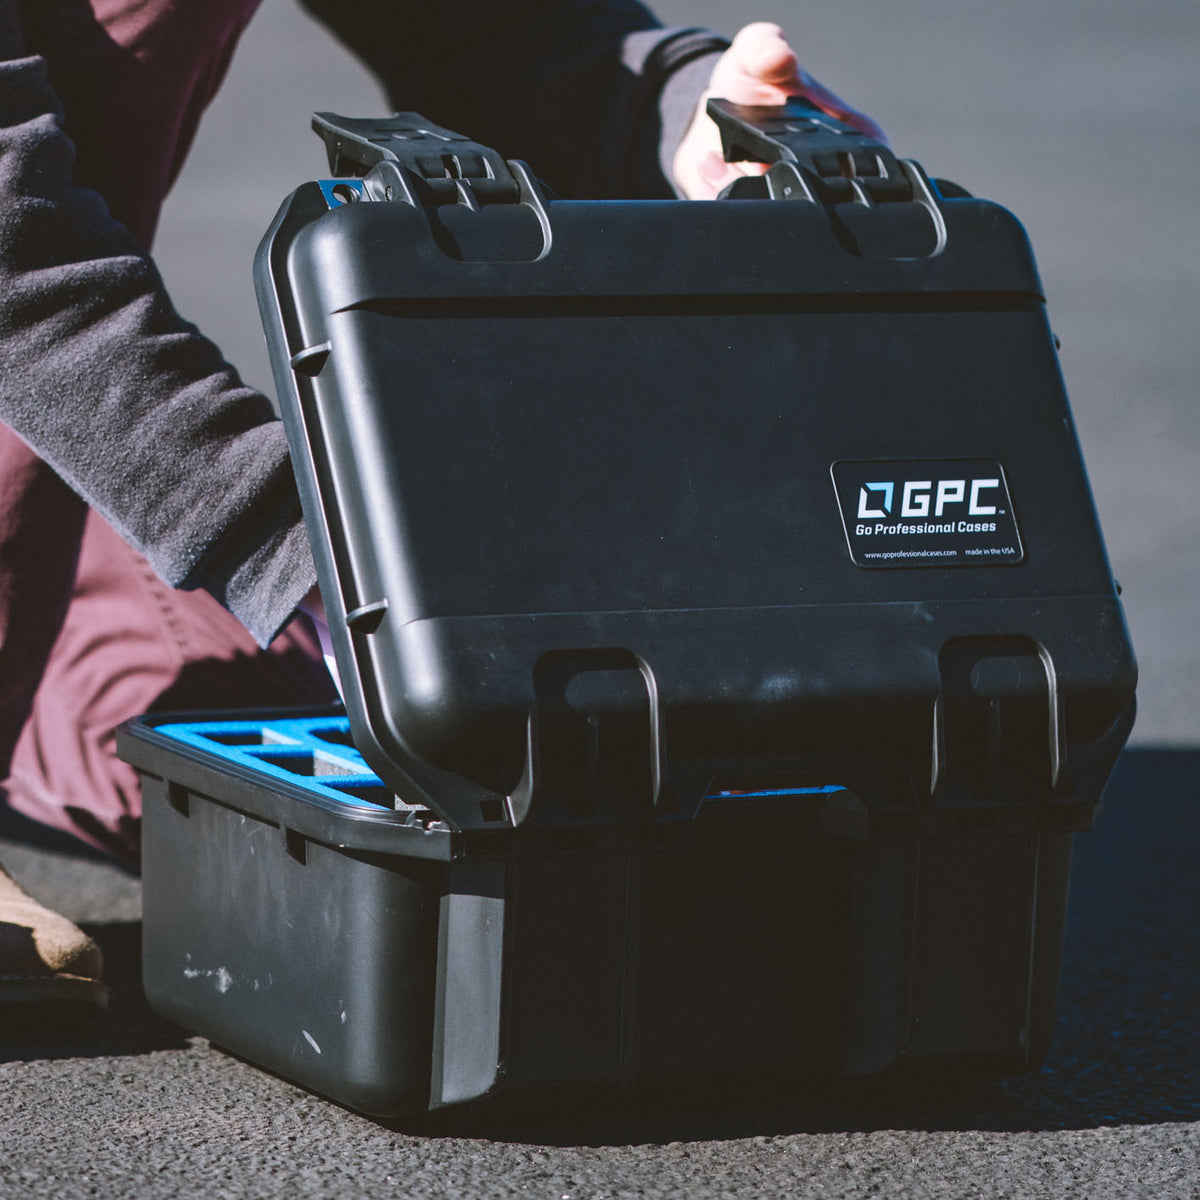 Cases for DJI | GPC, Inc. – Go Professional Cases